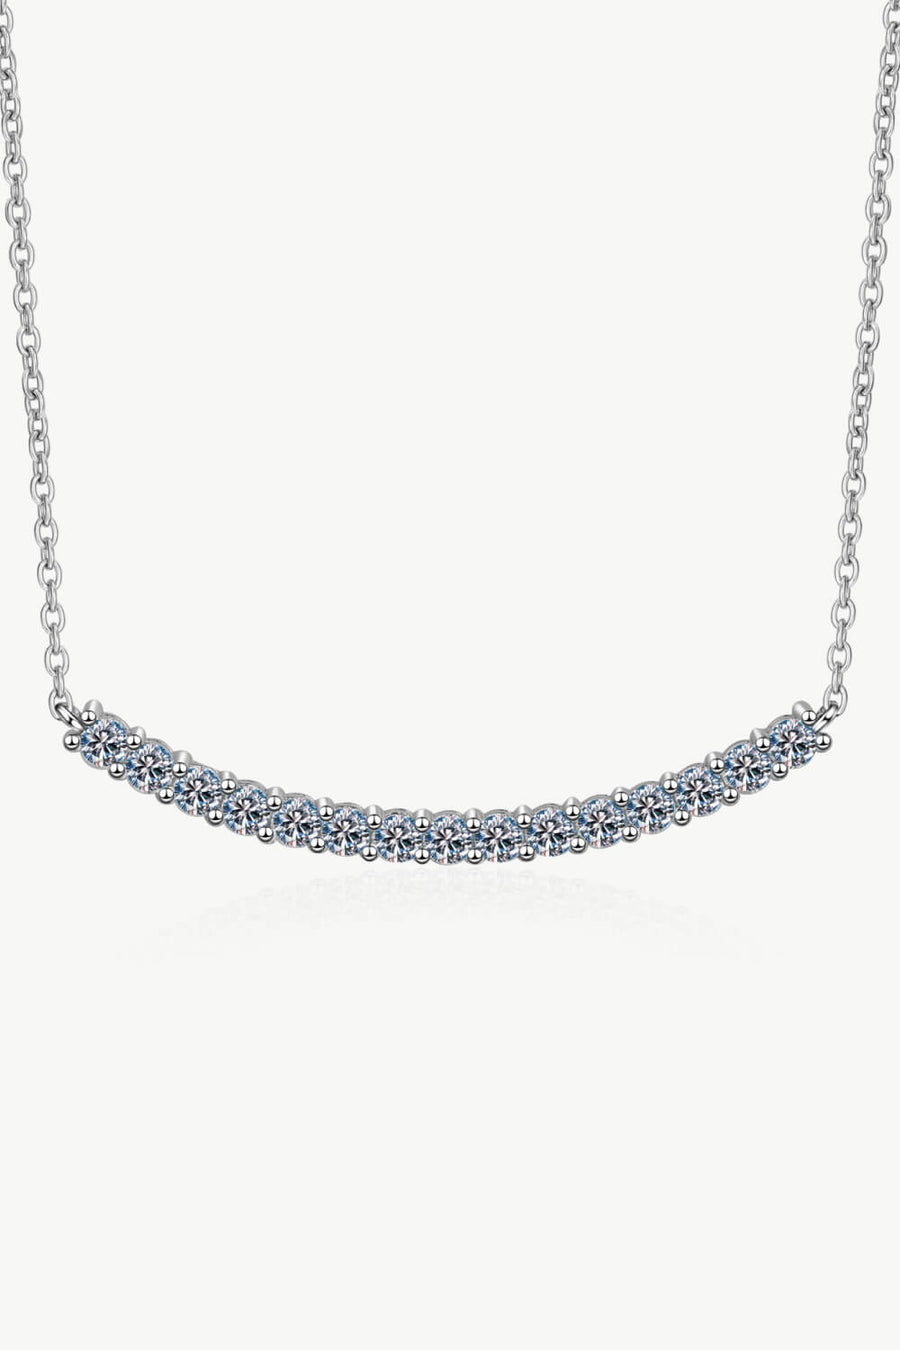 Best Diamond Necklace Jewelry Gifts for Women | 0.45 Carat Diamond Curved Bar Necklace | MASON New York